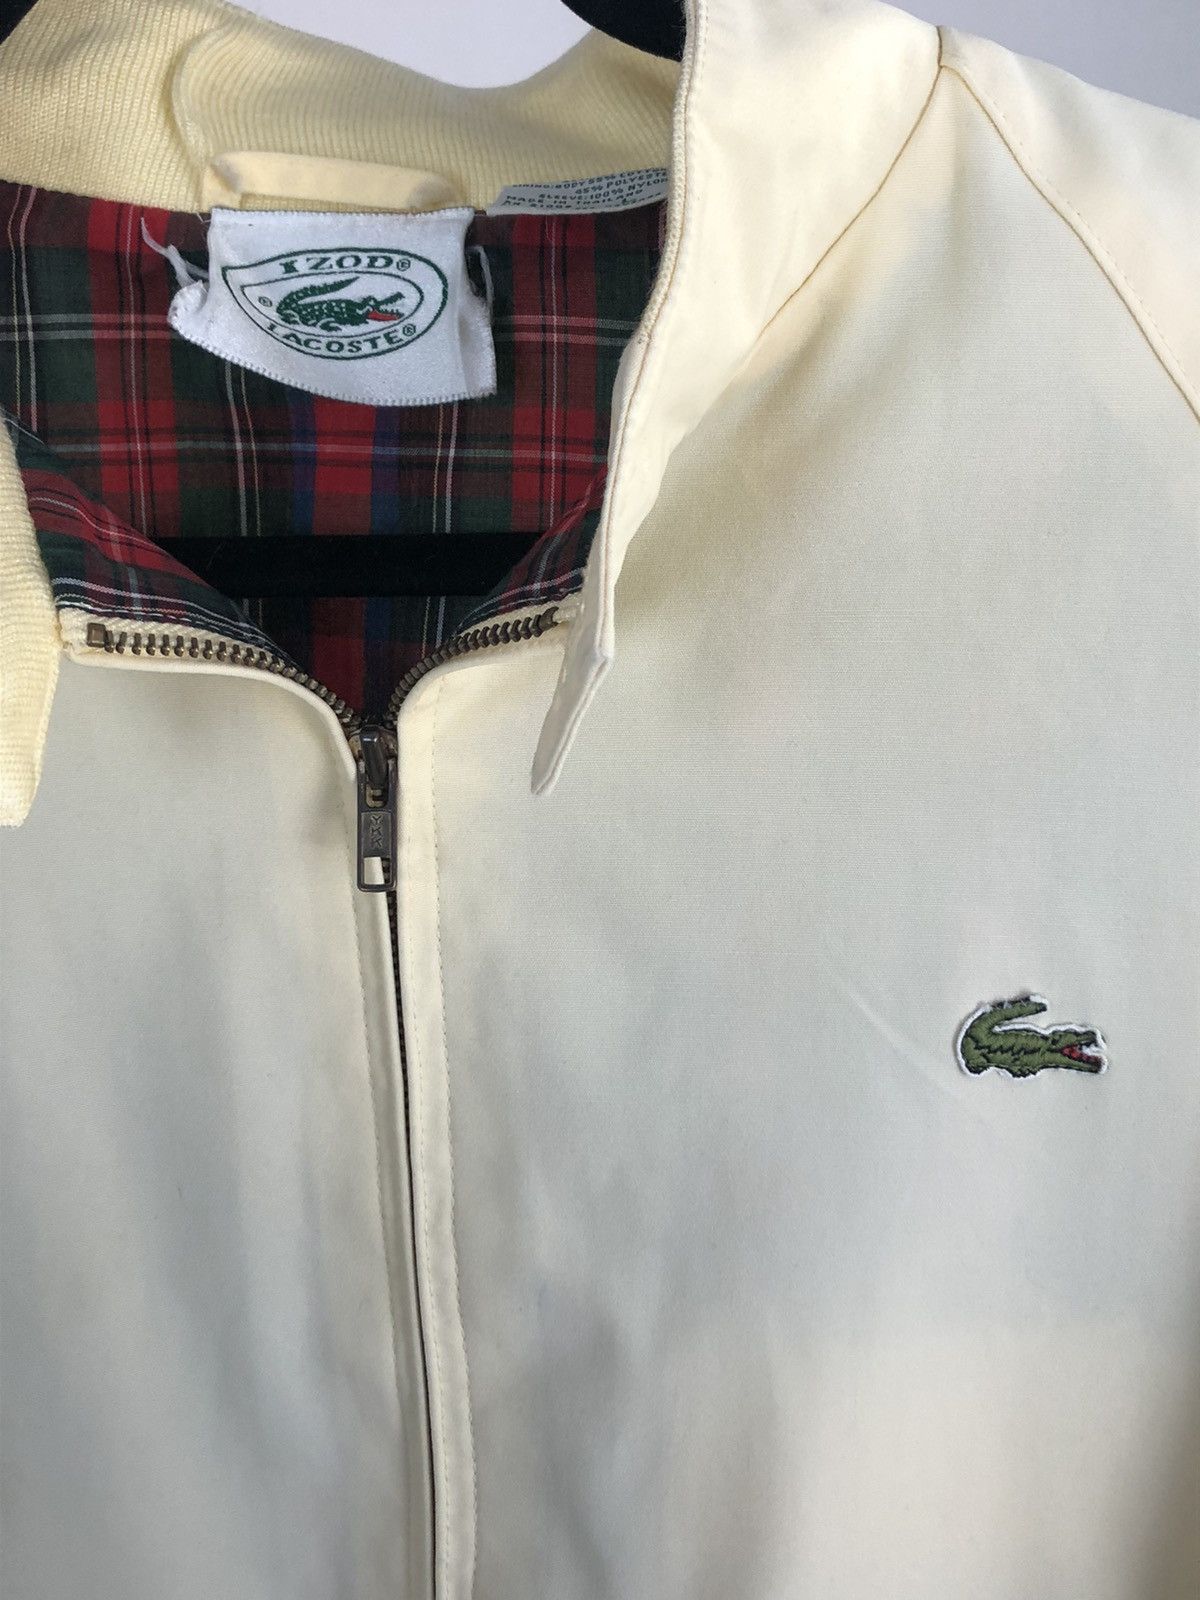 Lacoste Light Golf Jacket in Pale Yellow Size US L / EU 52-54 / 3 - 2 Preview